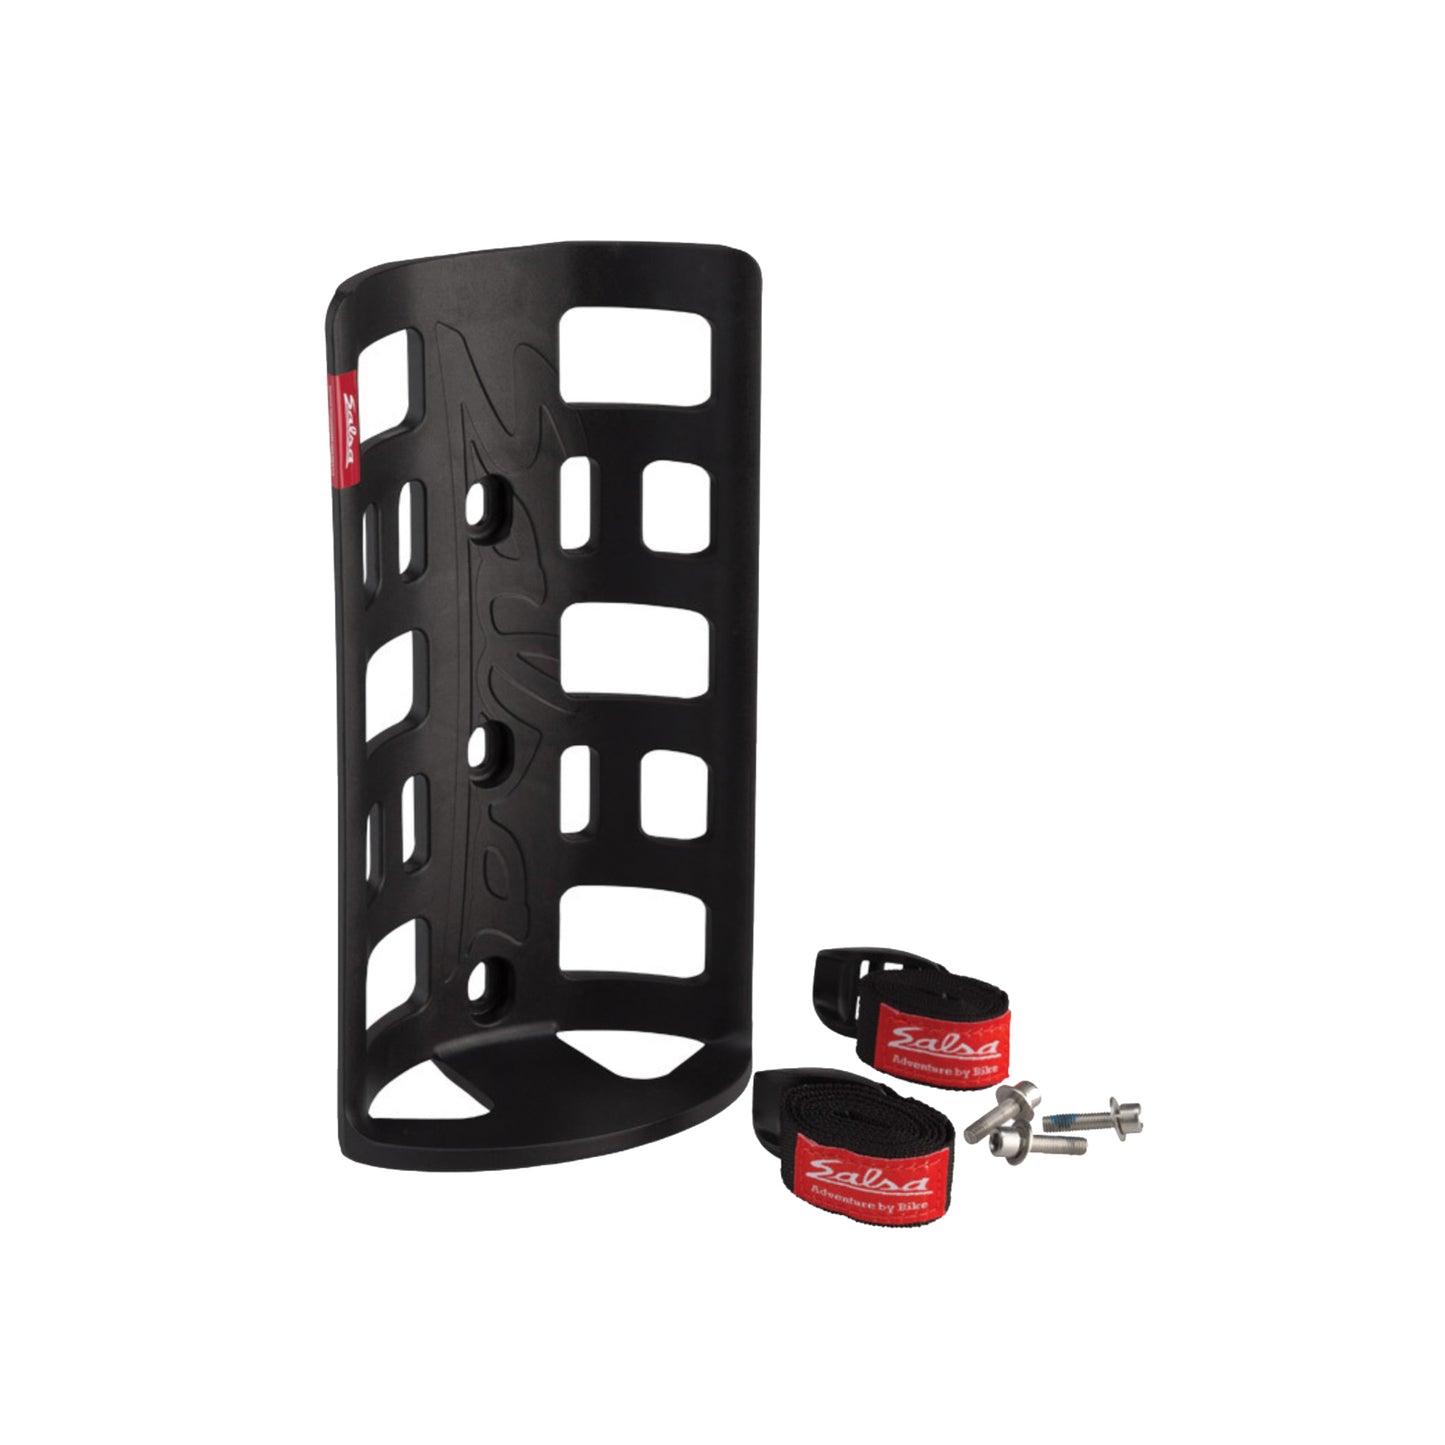 Salsa EXP Series Anything Cage HD w/ Straps